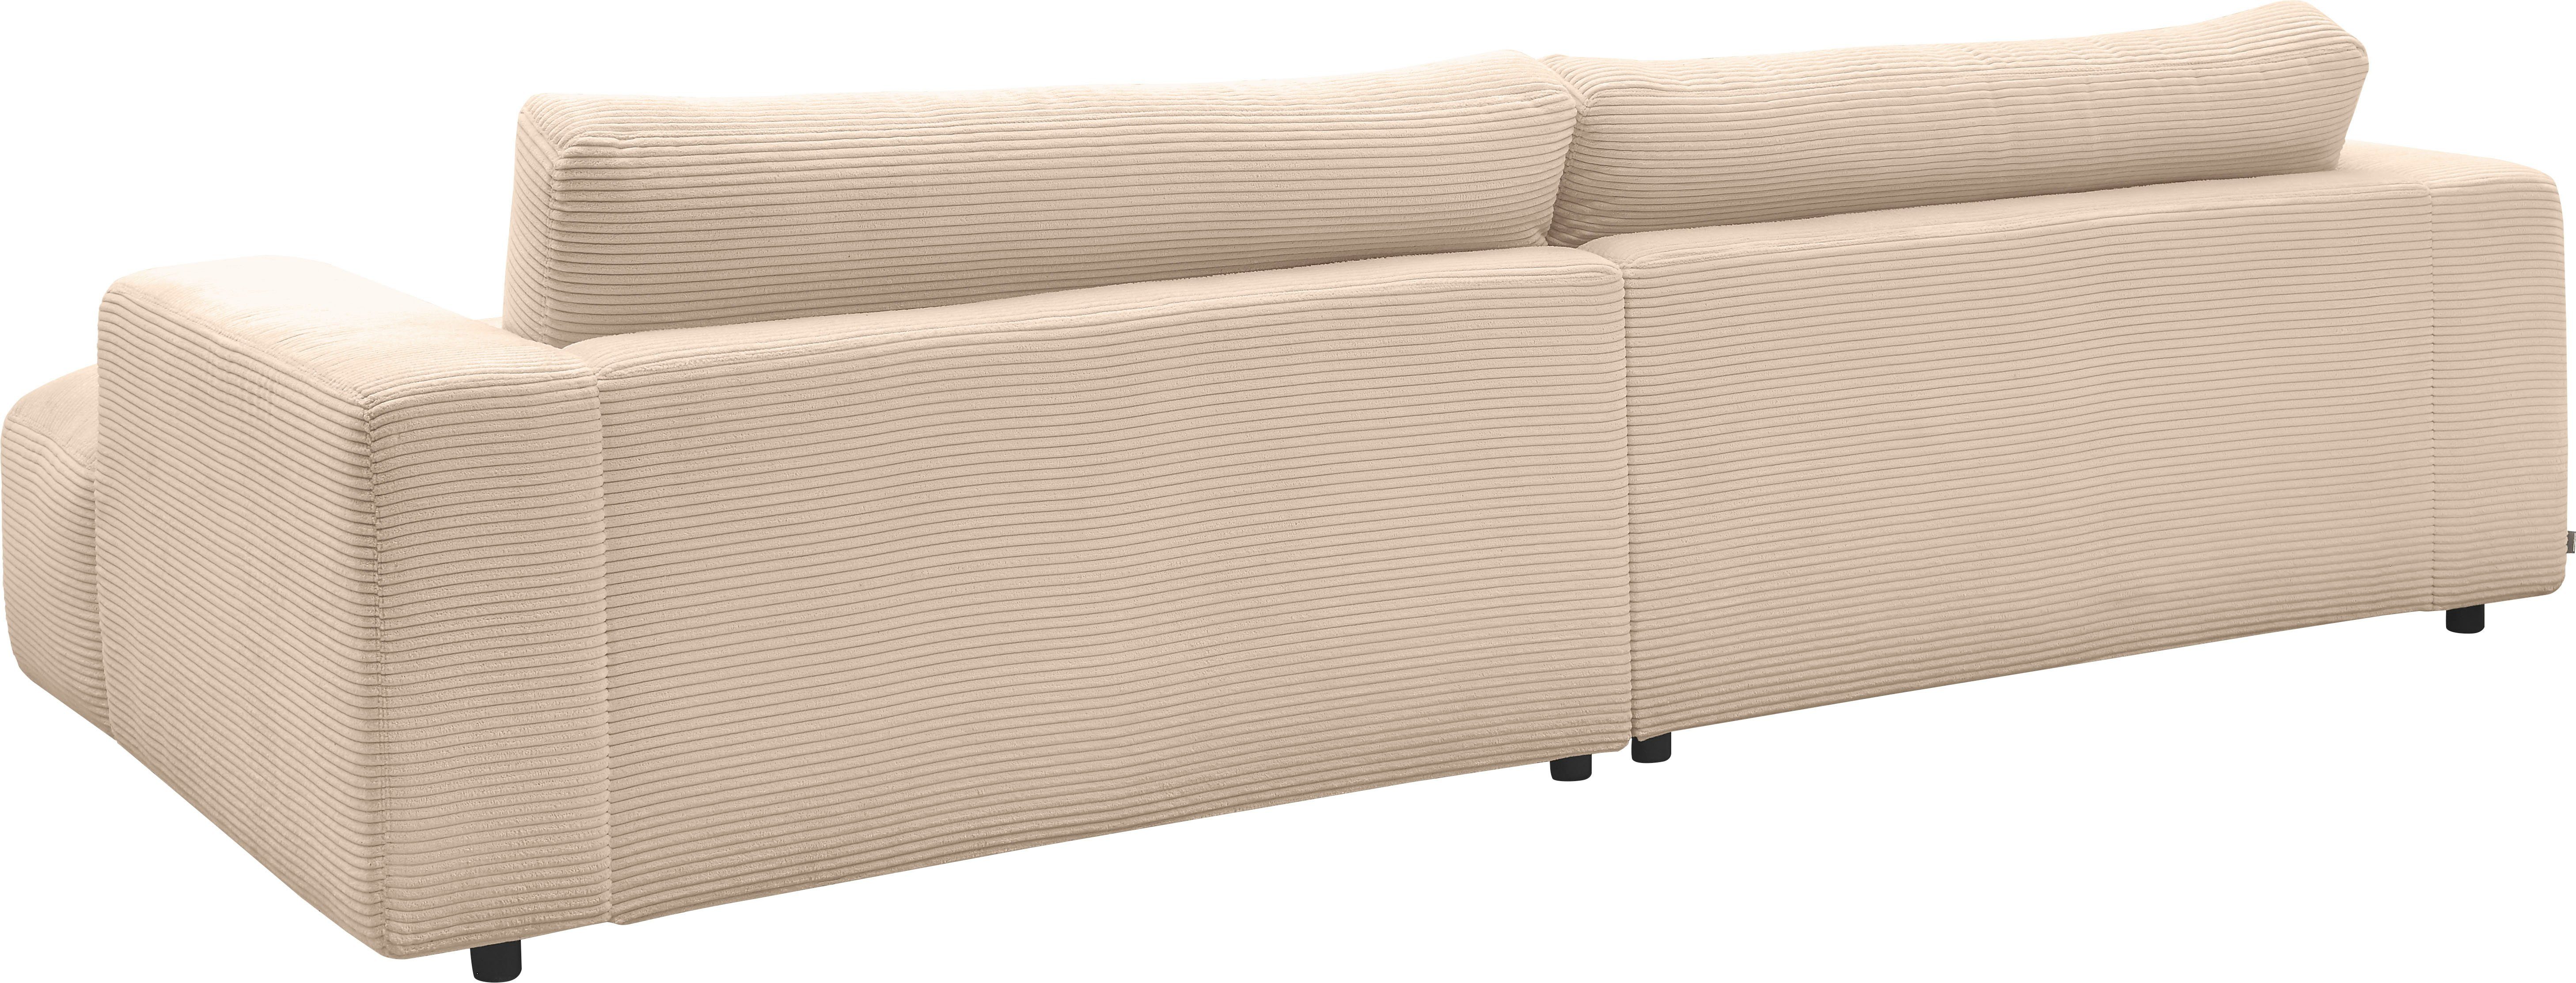 Lucia, M 292 Breite nature GALLERY branded cm Loungesofa Musterring by Cord-Bezug,